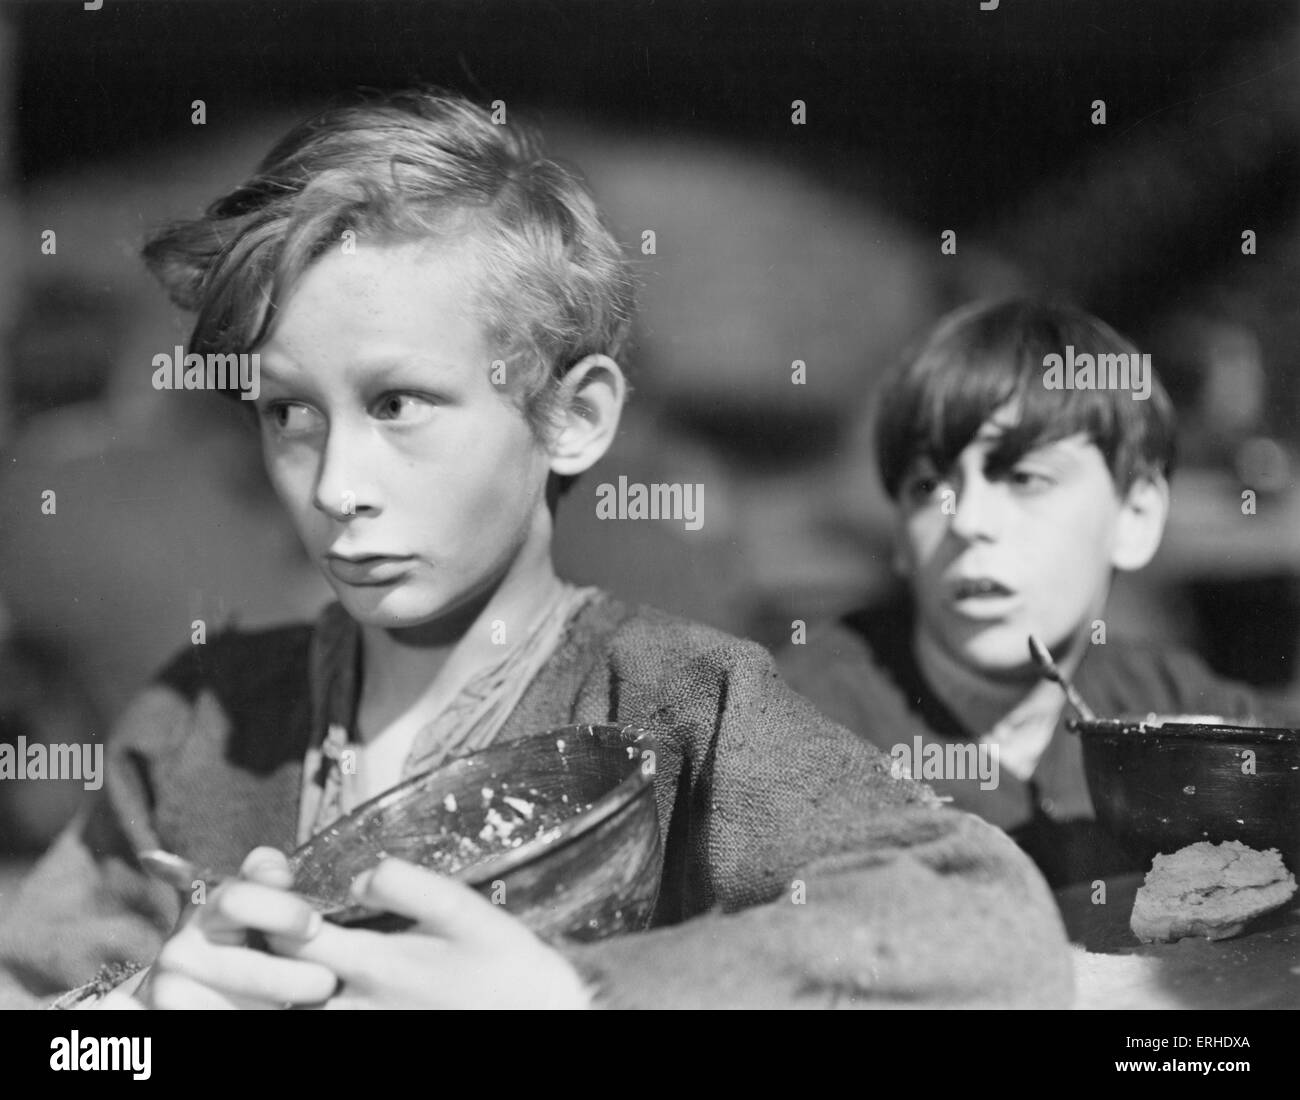 Oliver Twist film still from 1948 Rank Film production of Charles Dickens British novelist, 7 February 1812 - 9 June 1870. With Stock Photo